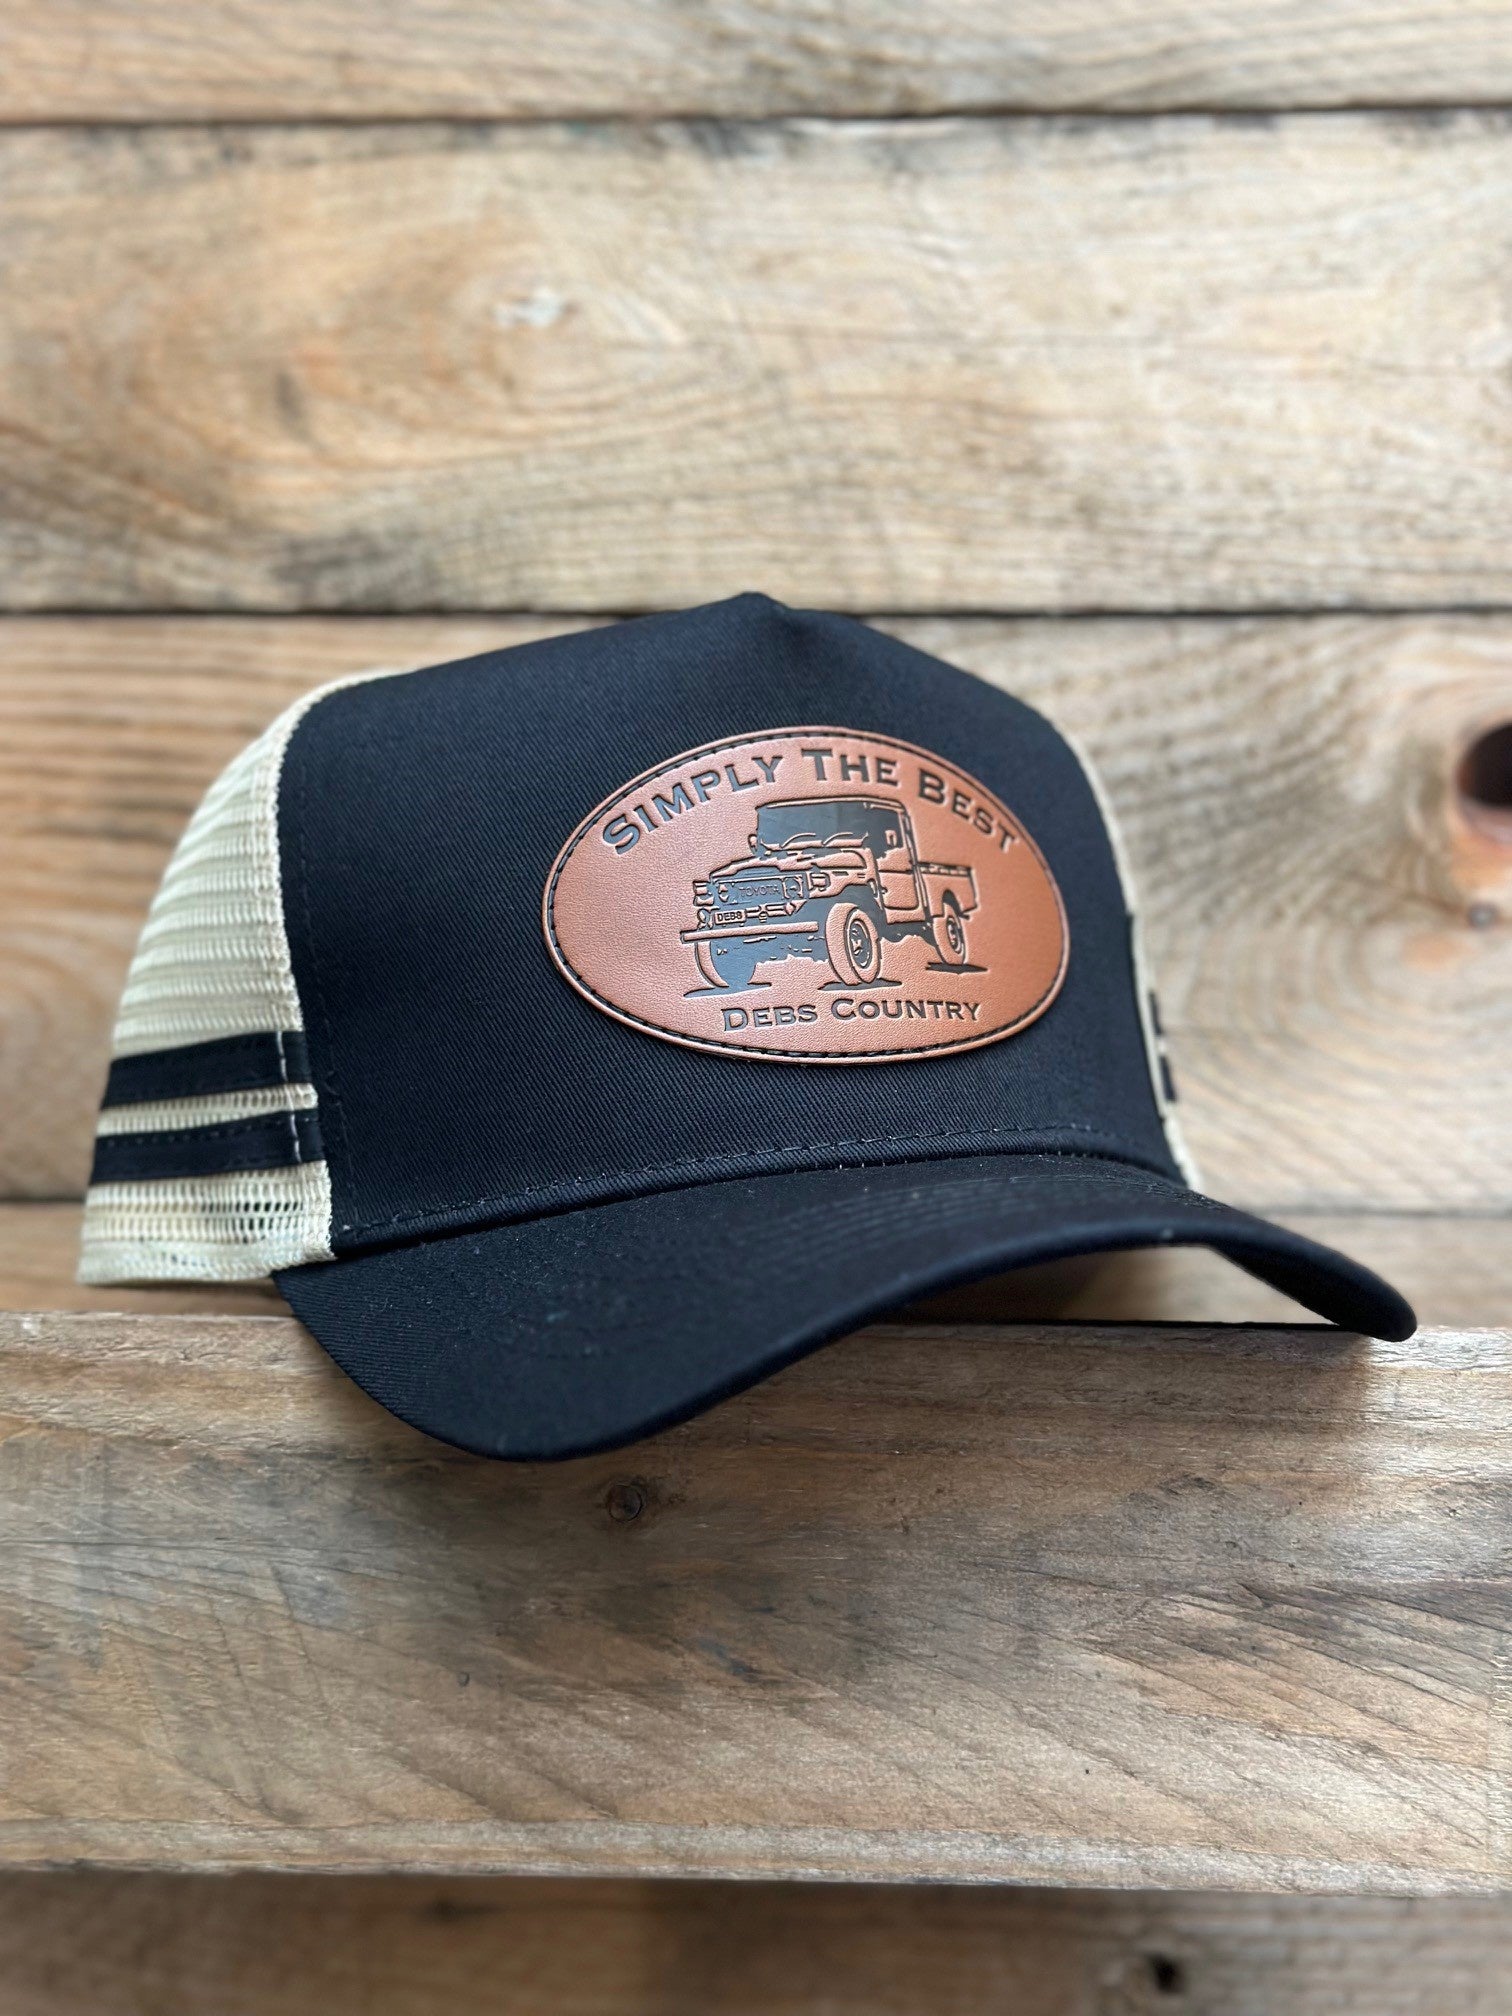 Debs Country Outfitters Simply the Best Trucker Cap - Black (6857327444045)